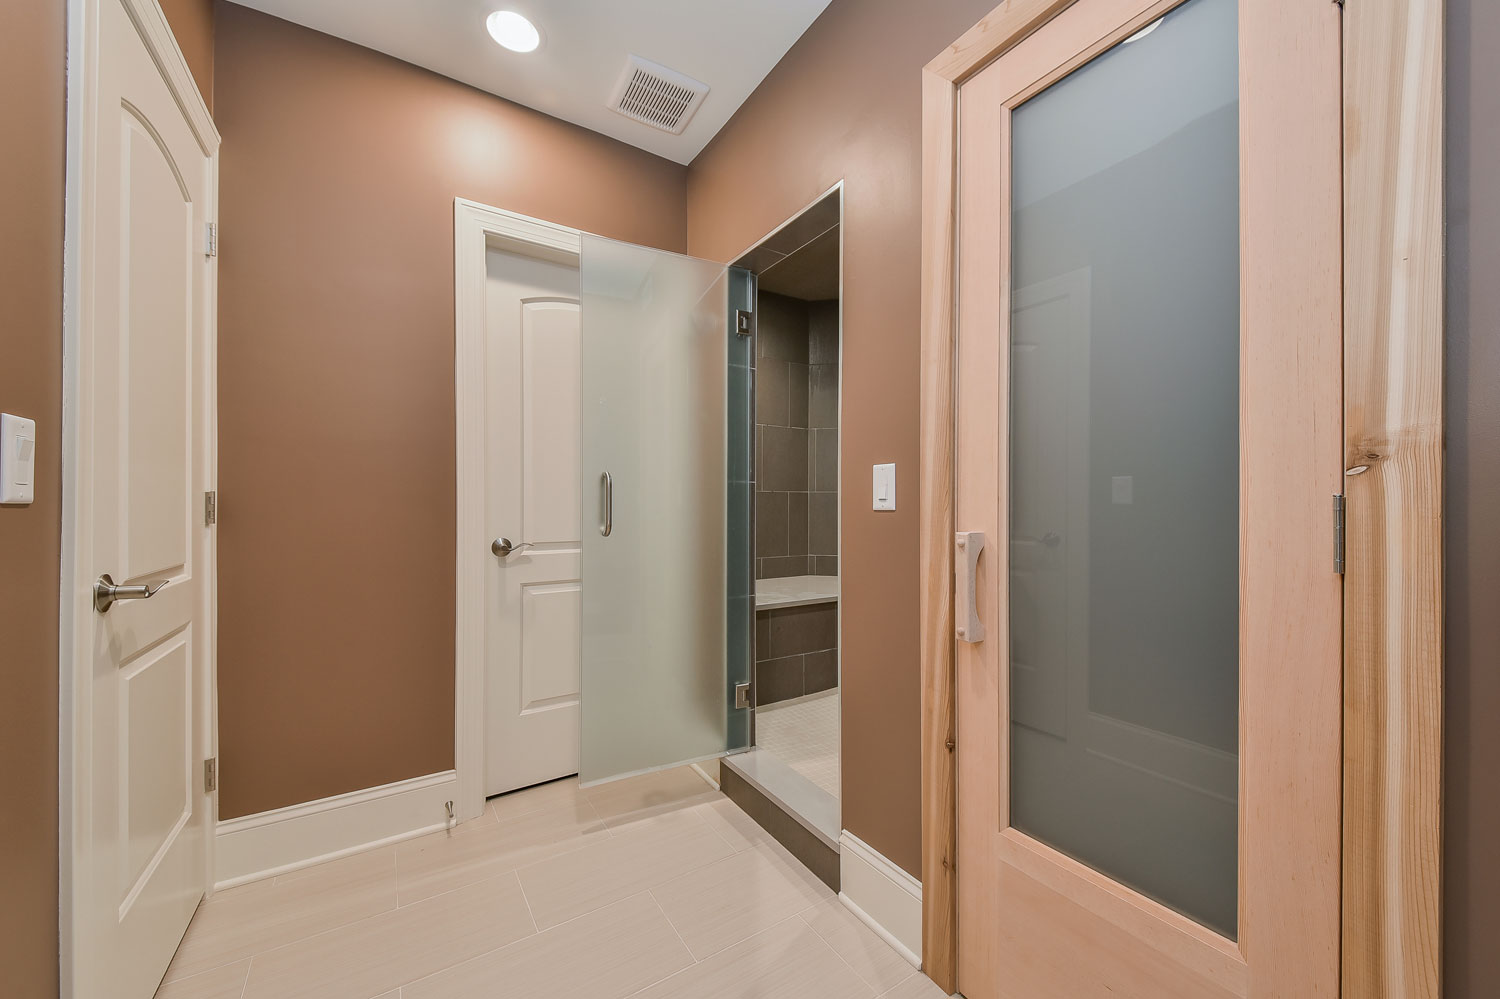 Downers Grove Basement Remodel with Sauna, Steam Shower, Office - Sebring Design Build